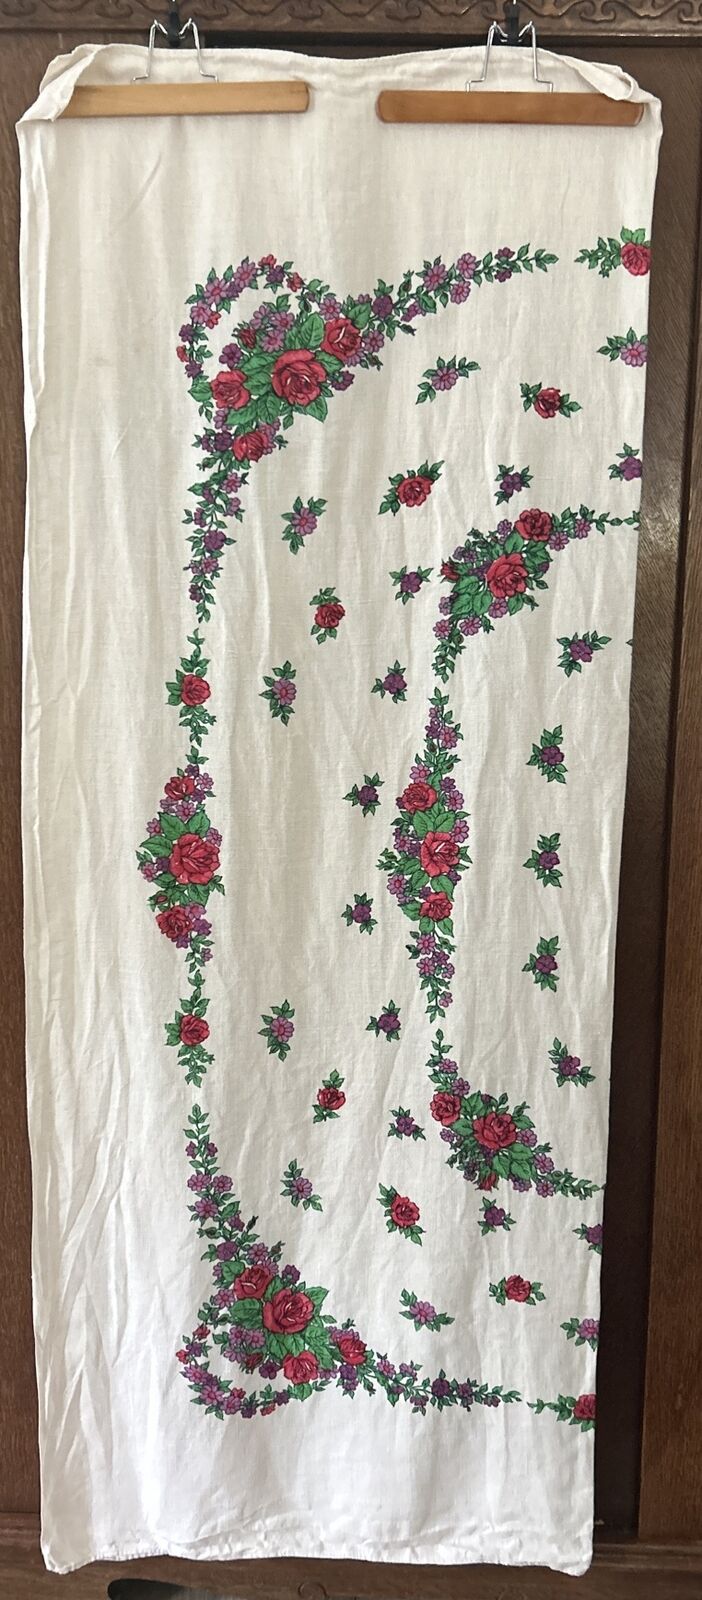 Vintage Printed Linen Tablecloth 49 X 62 Cottage Core Roses